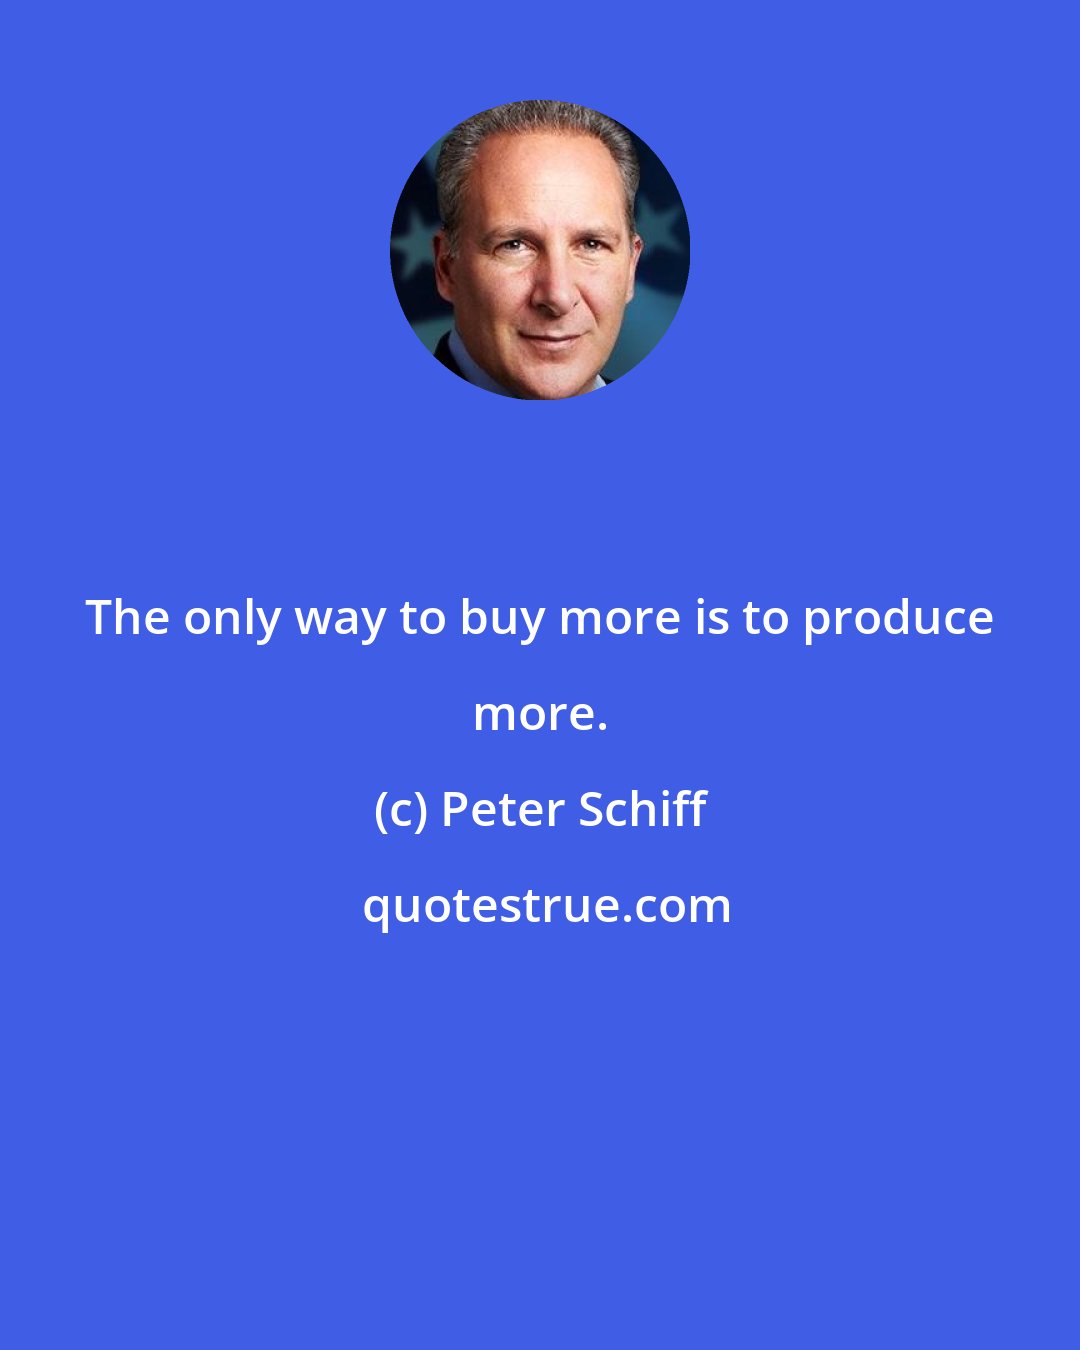 Peter Schiff: The only way to buy more is to produce more.